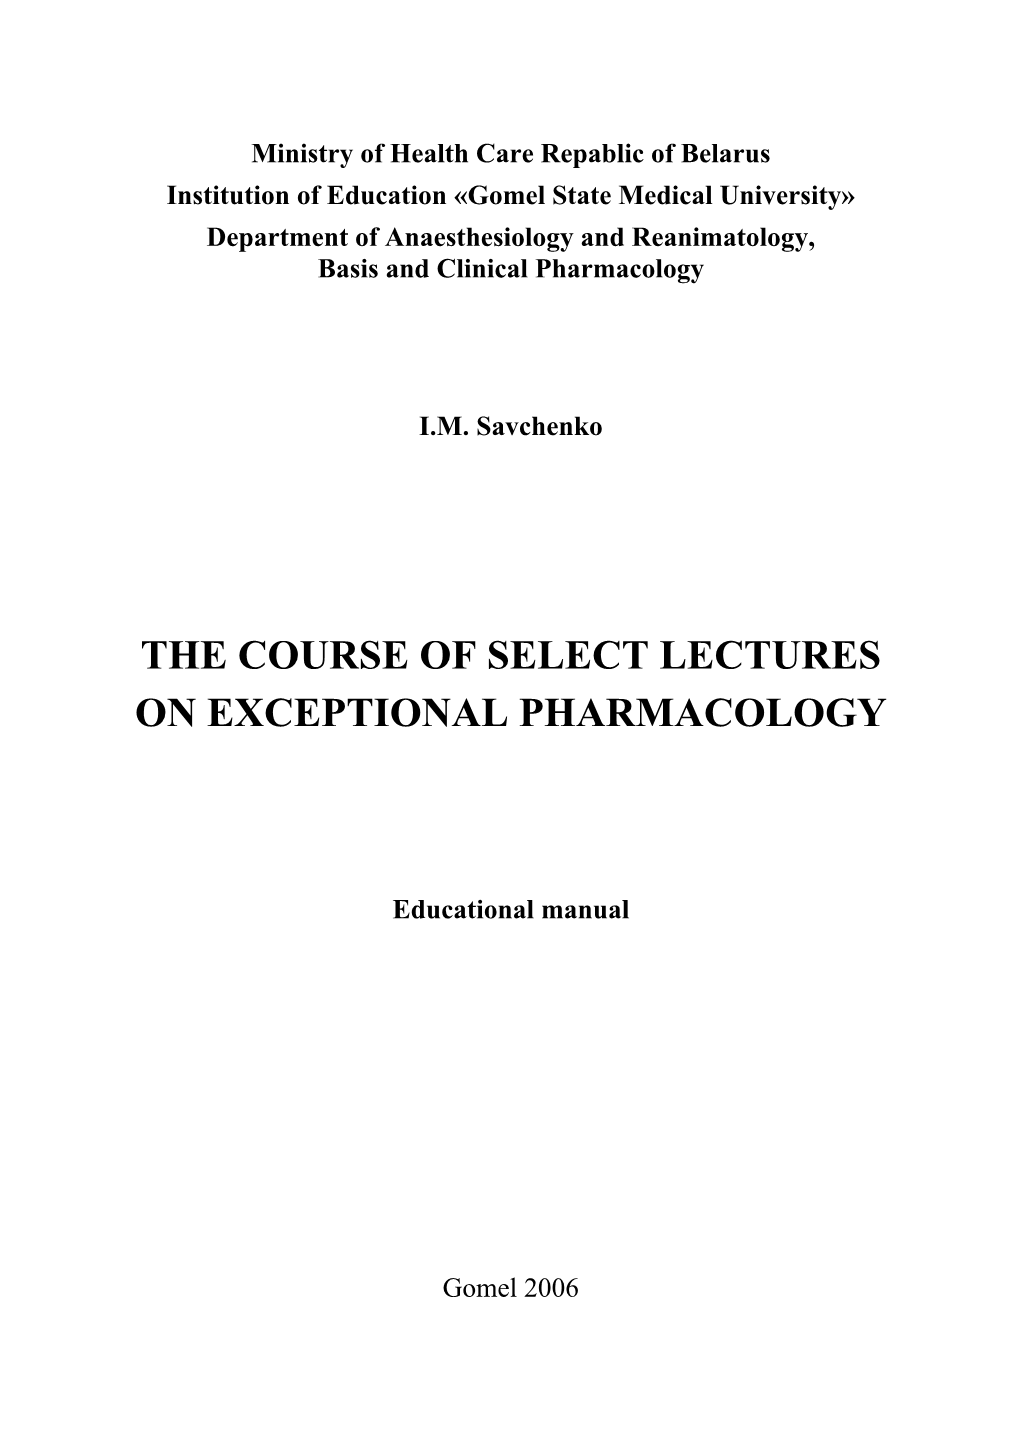 The Course of Select Lectures on Exceptional Pharmacology